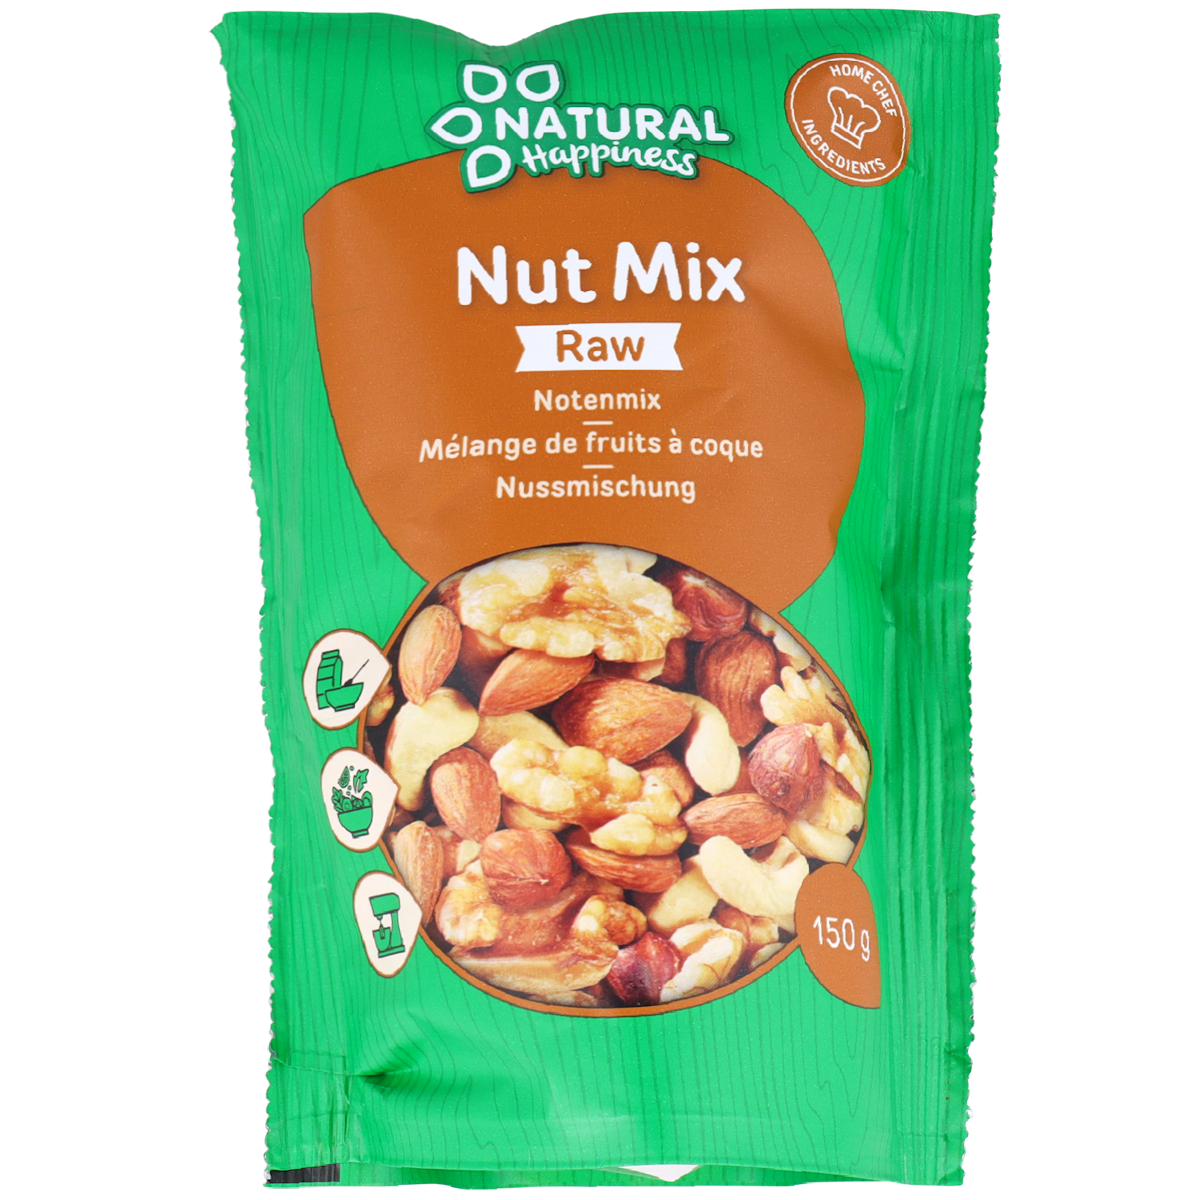 Natural Happiness Nut Mix